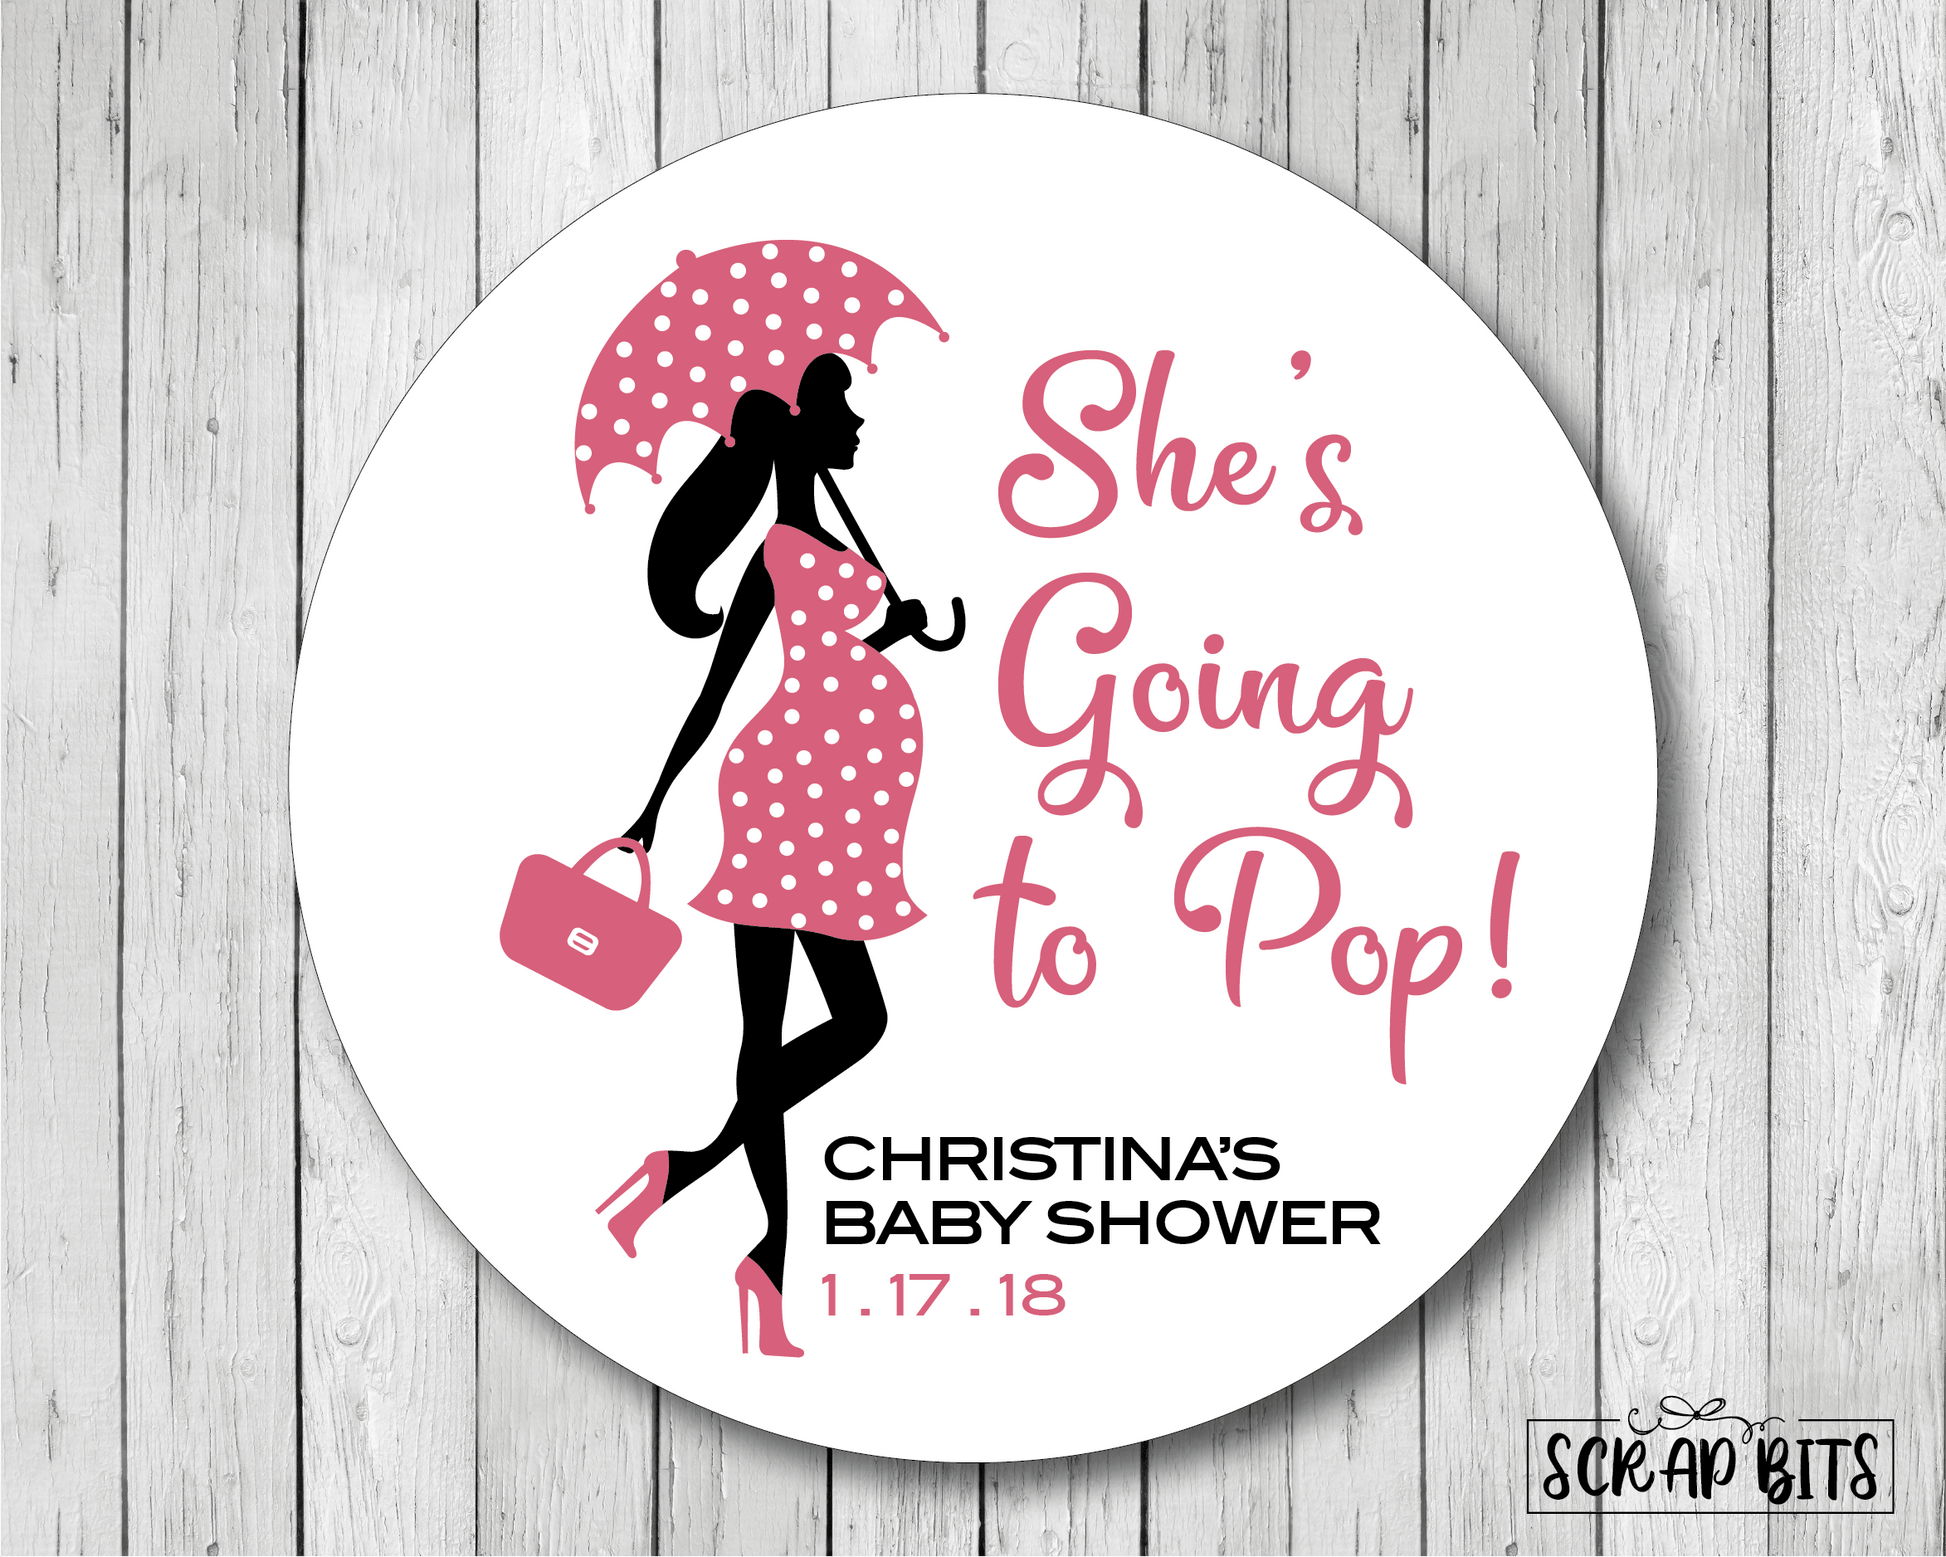 Going To Pop Pregnant Lady with Umbrella . Baby Shower Stickers or Tags - Scrap Bits